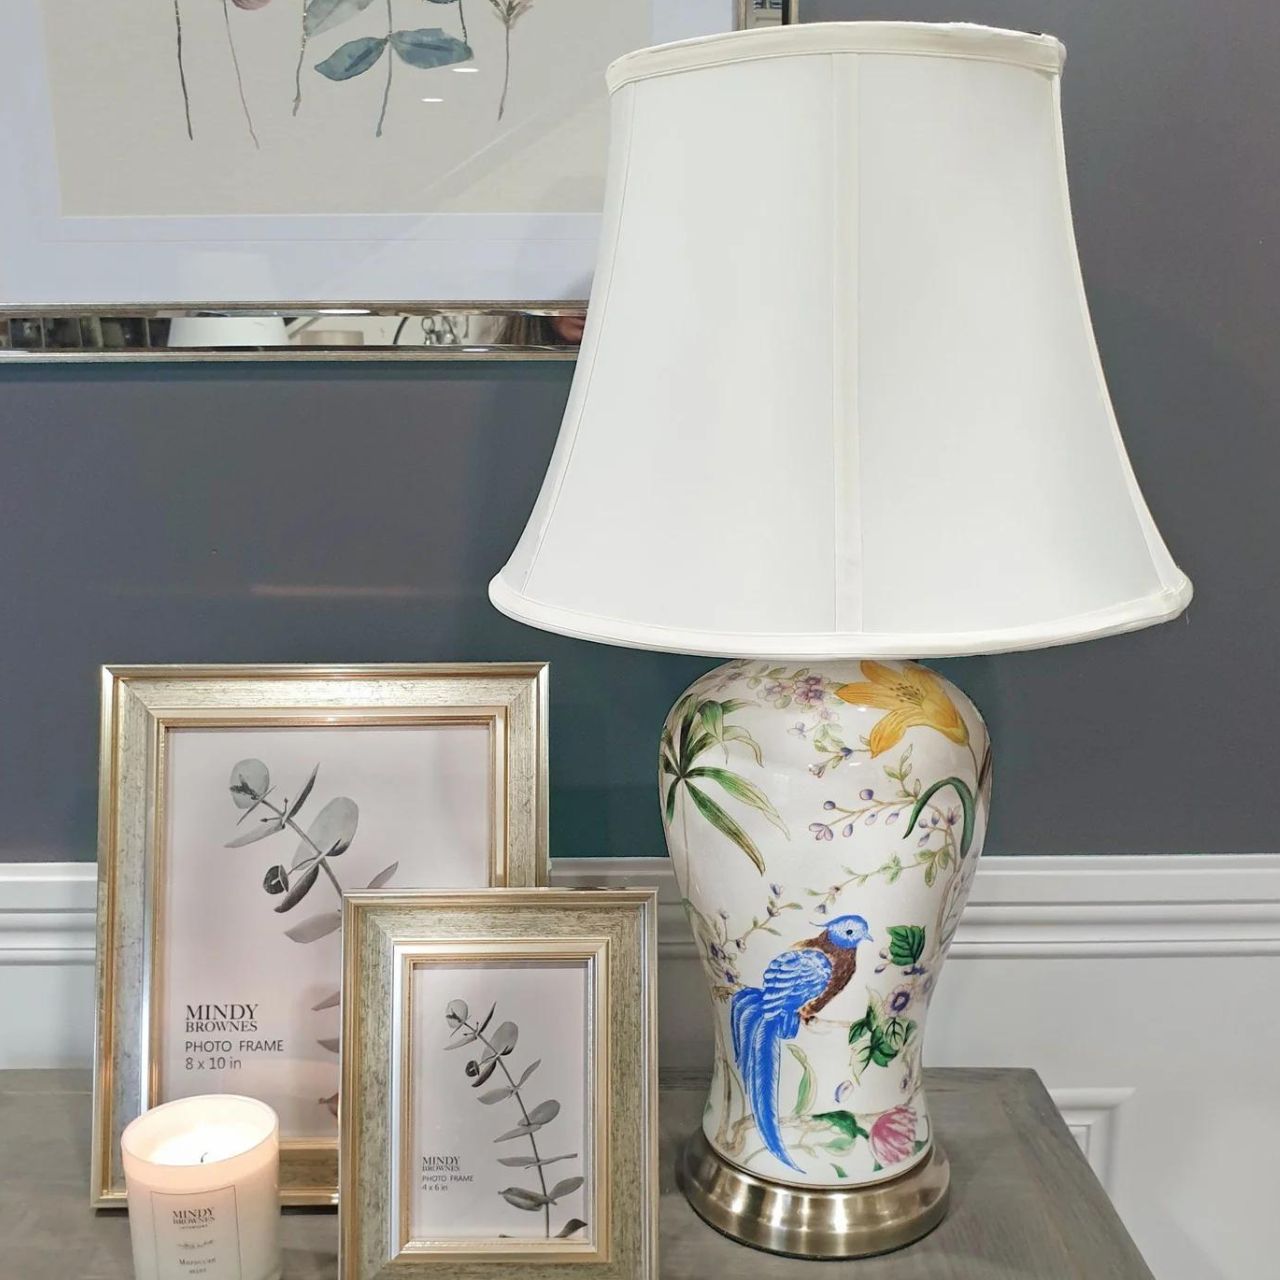 Mindy Brownes Interiors Ava Lamp  Birds of Paradise Lamp, bring a pop of colour to your room. Ceramic lamp with brass bass and white linen shade.